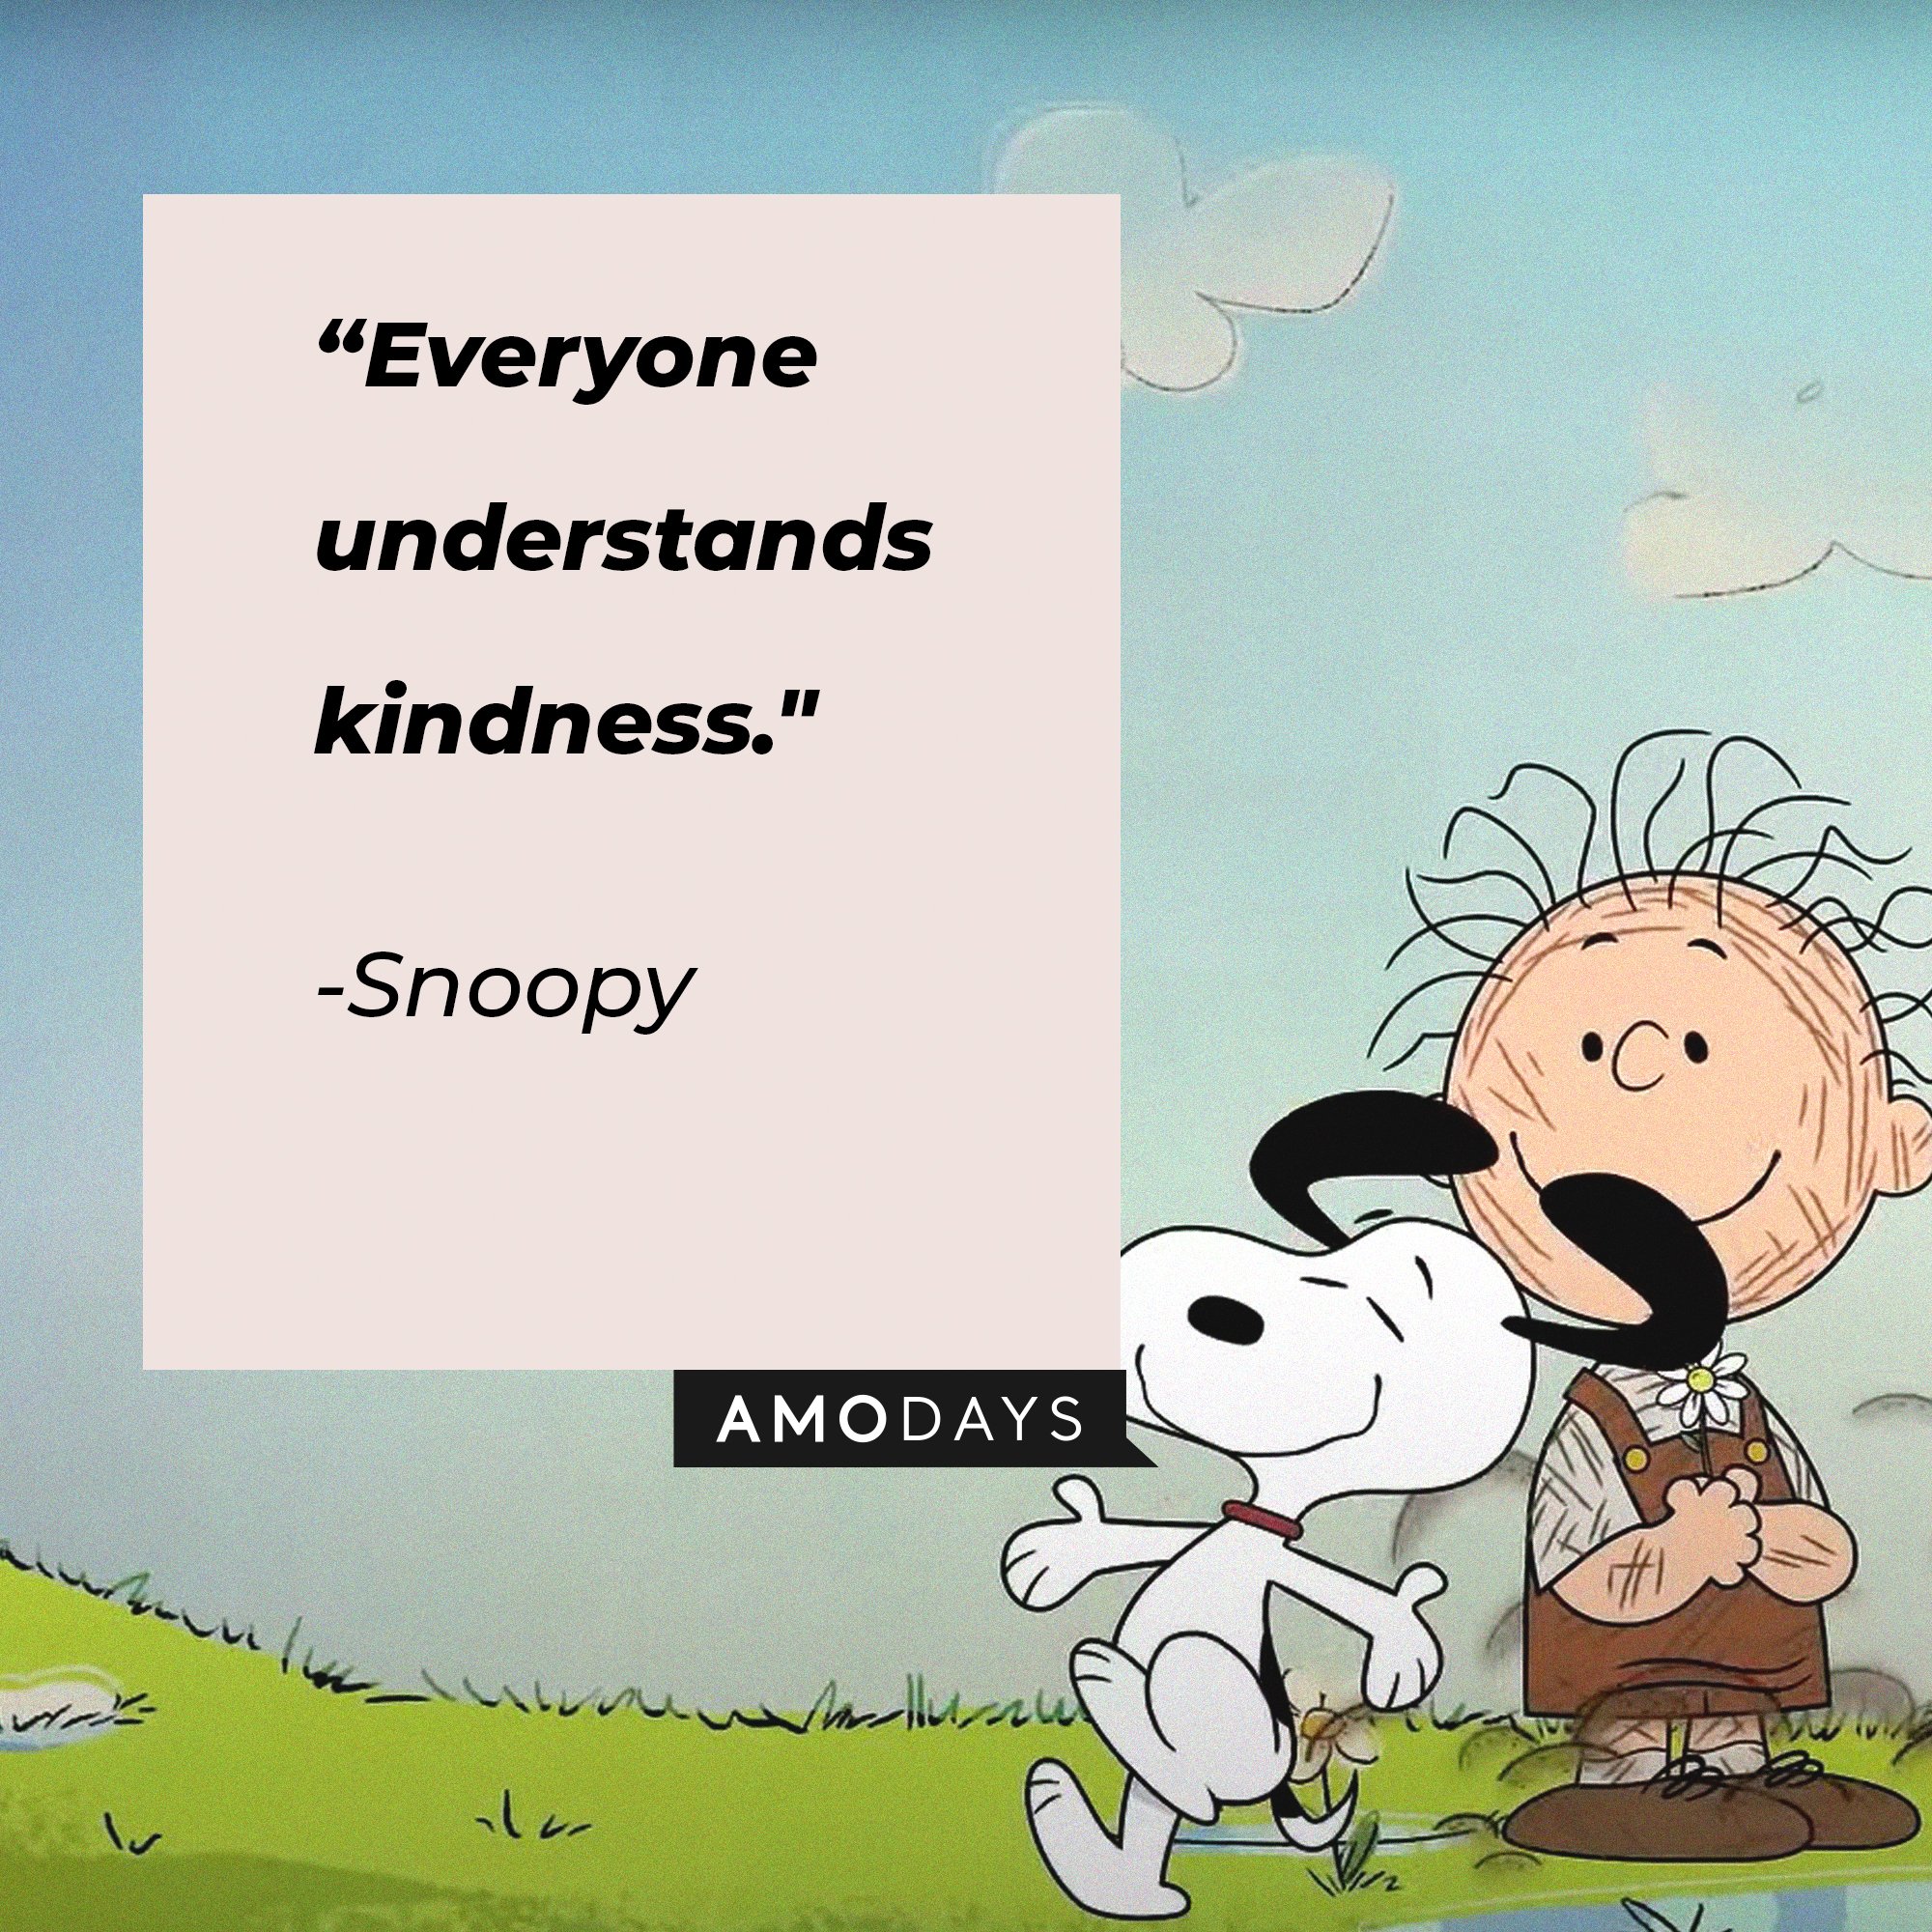 Snoopy’s quote: "Everyone understands kindness." | Image: AmoDays